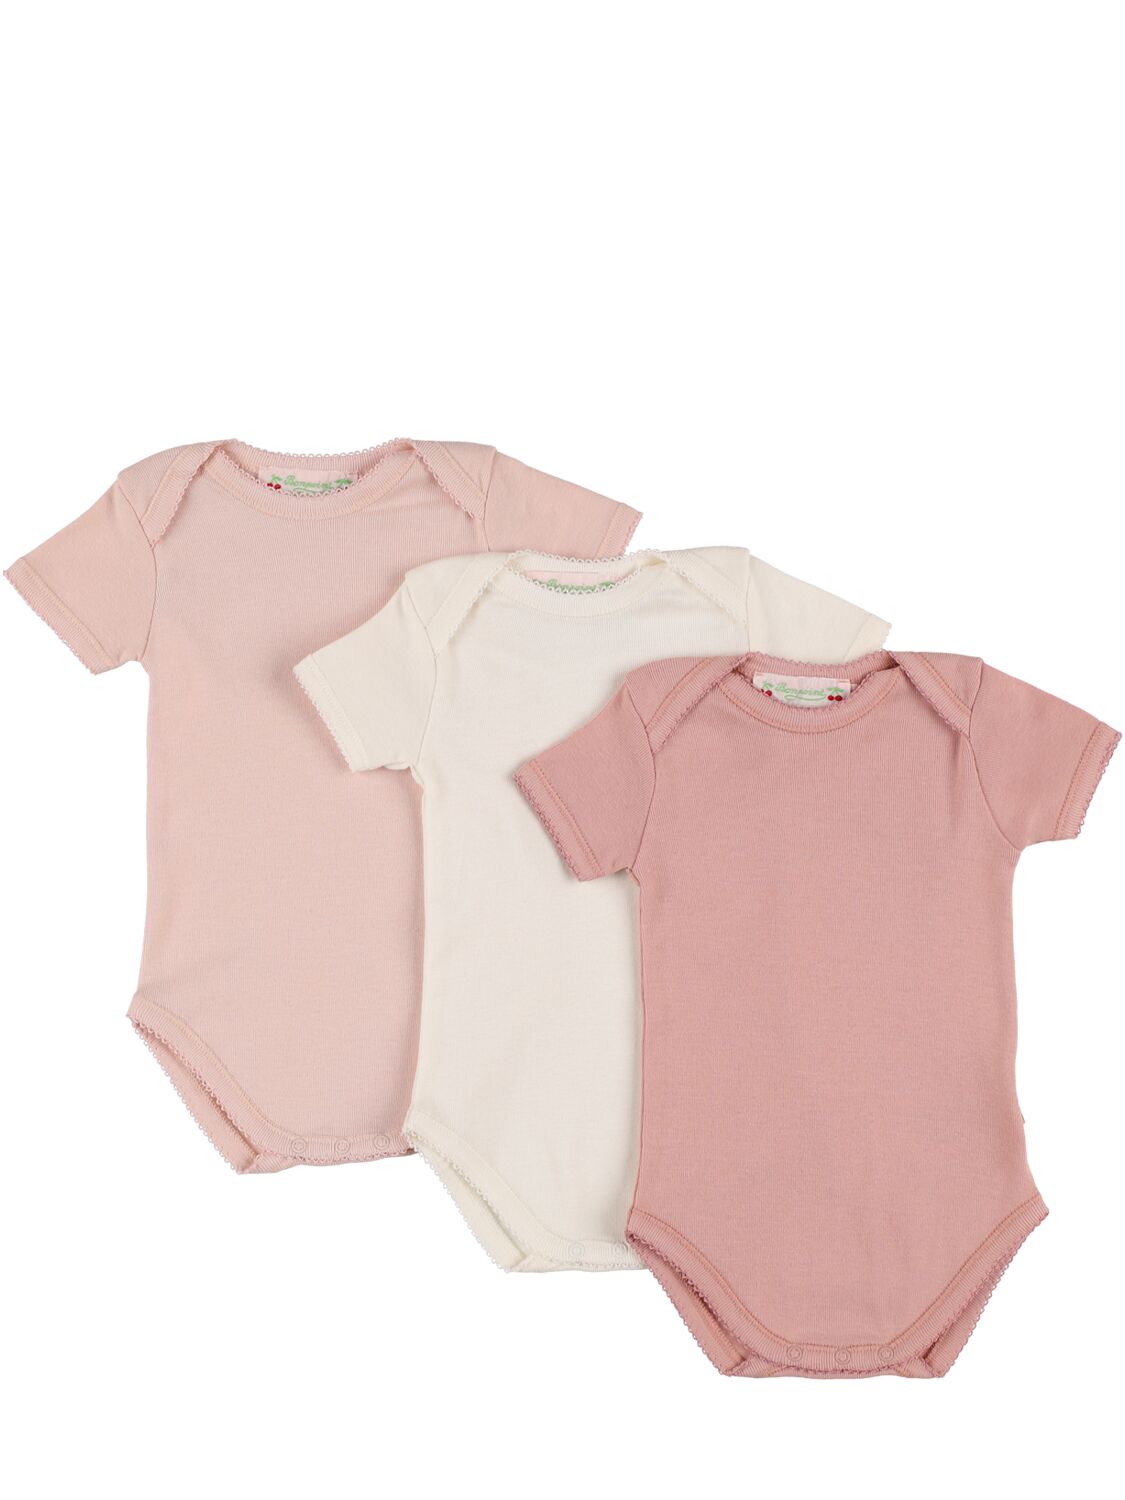 Bonpoint Babies' Set Of 3 Cotton Bodysuits In Light Pink